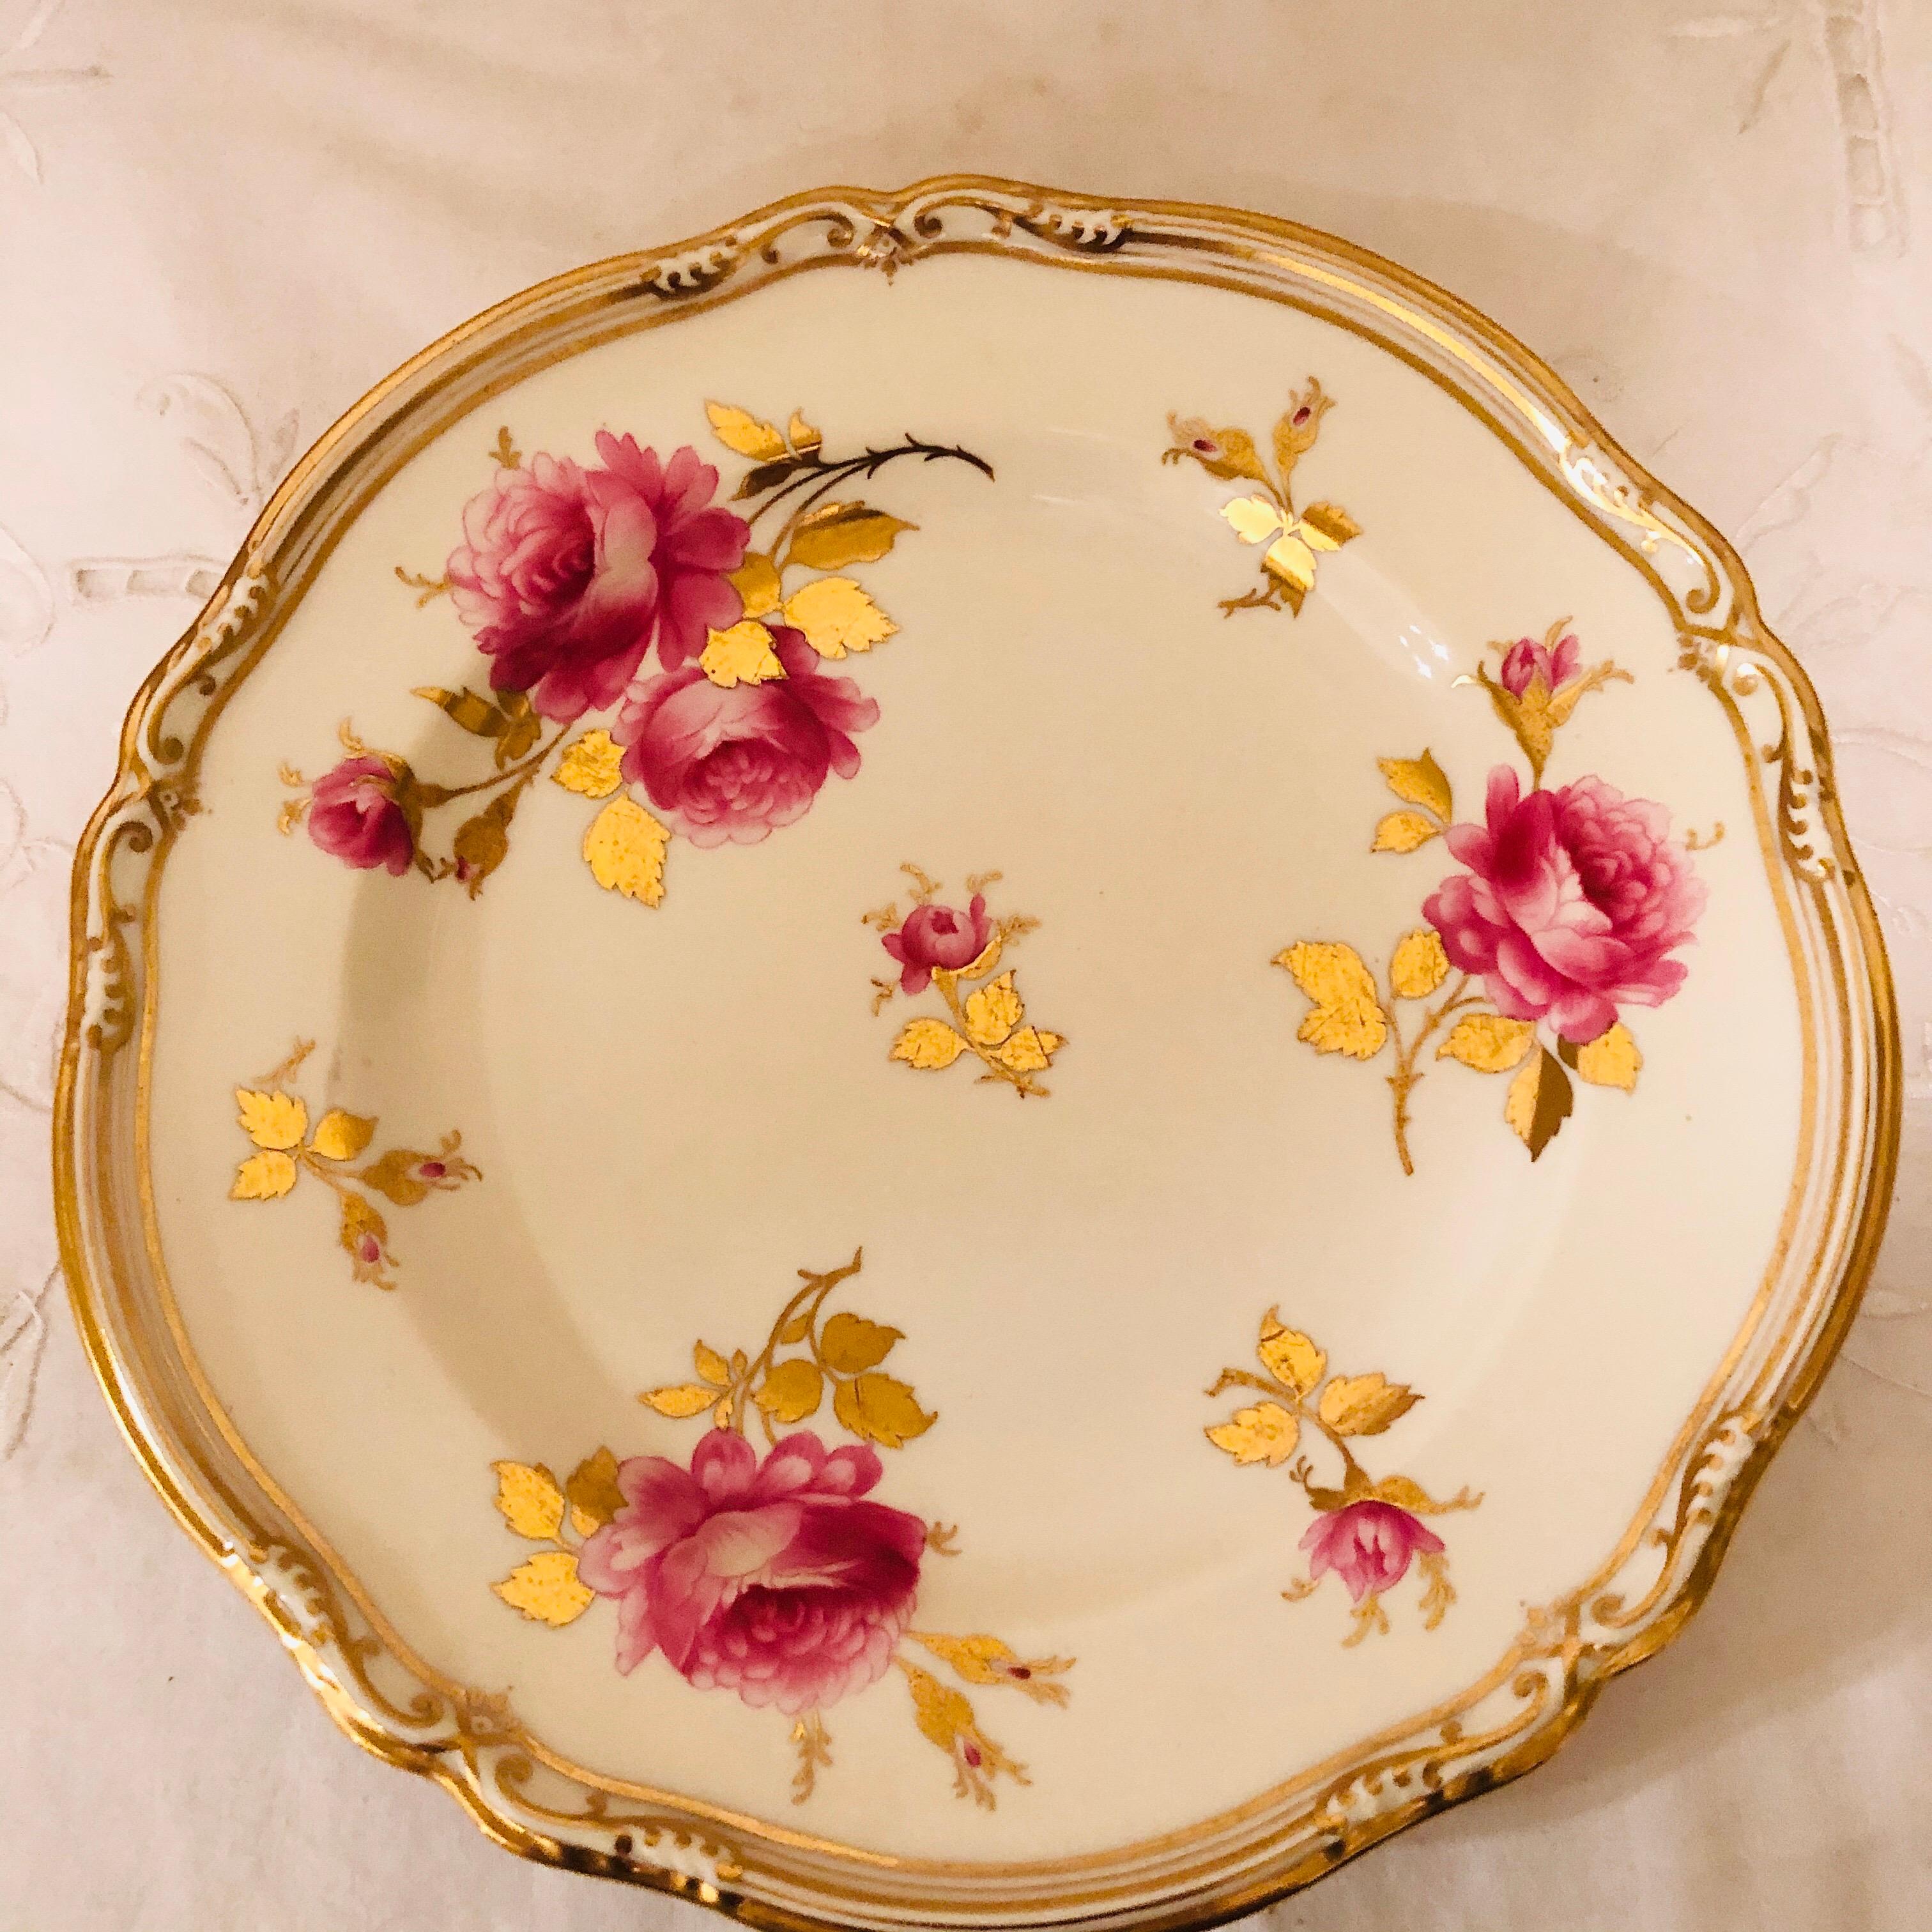 Porcelain Spode Made for Tiffany 66 Piece Dinner Service Decorated with Large Pink Roses